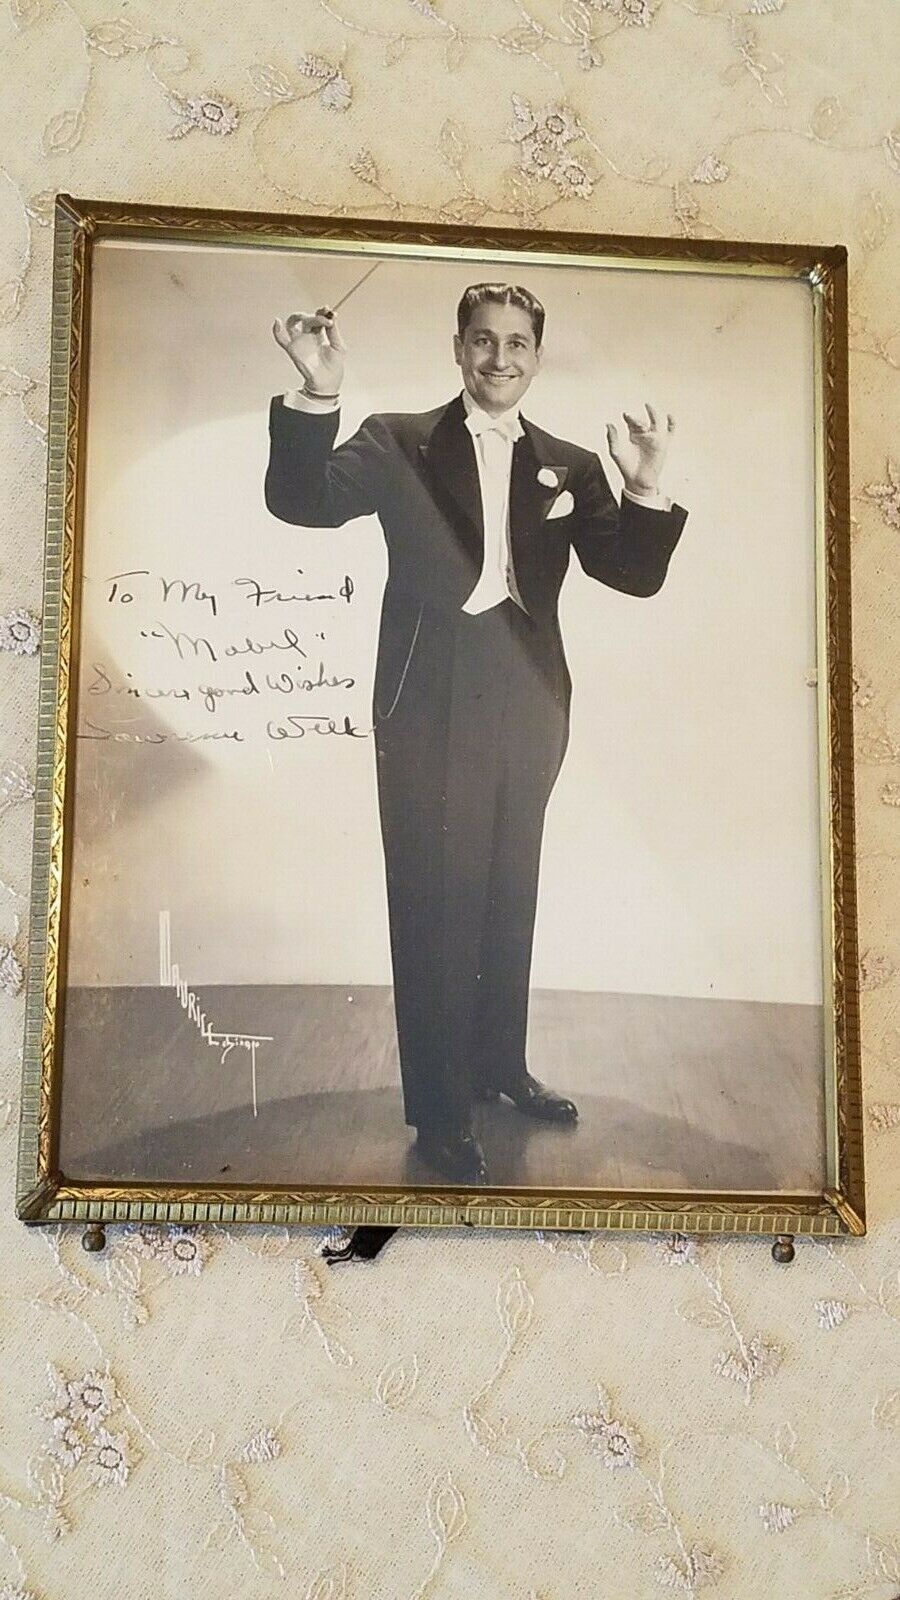 SIGNED PICTURE Lawrence Welk IN HIS YOUTH, very difficult autograph time period